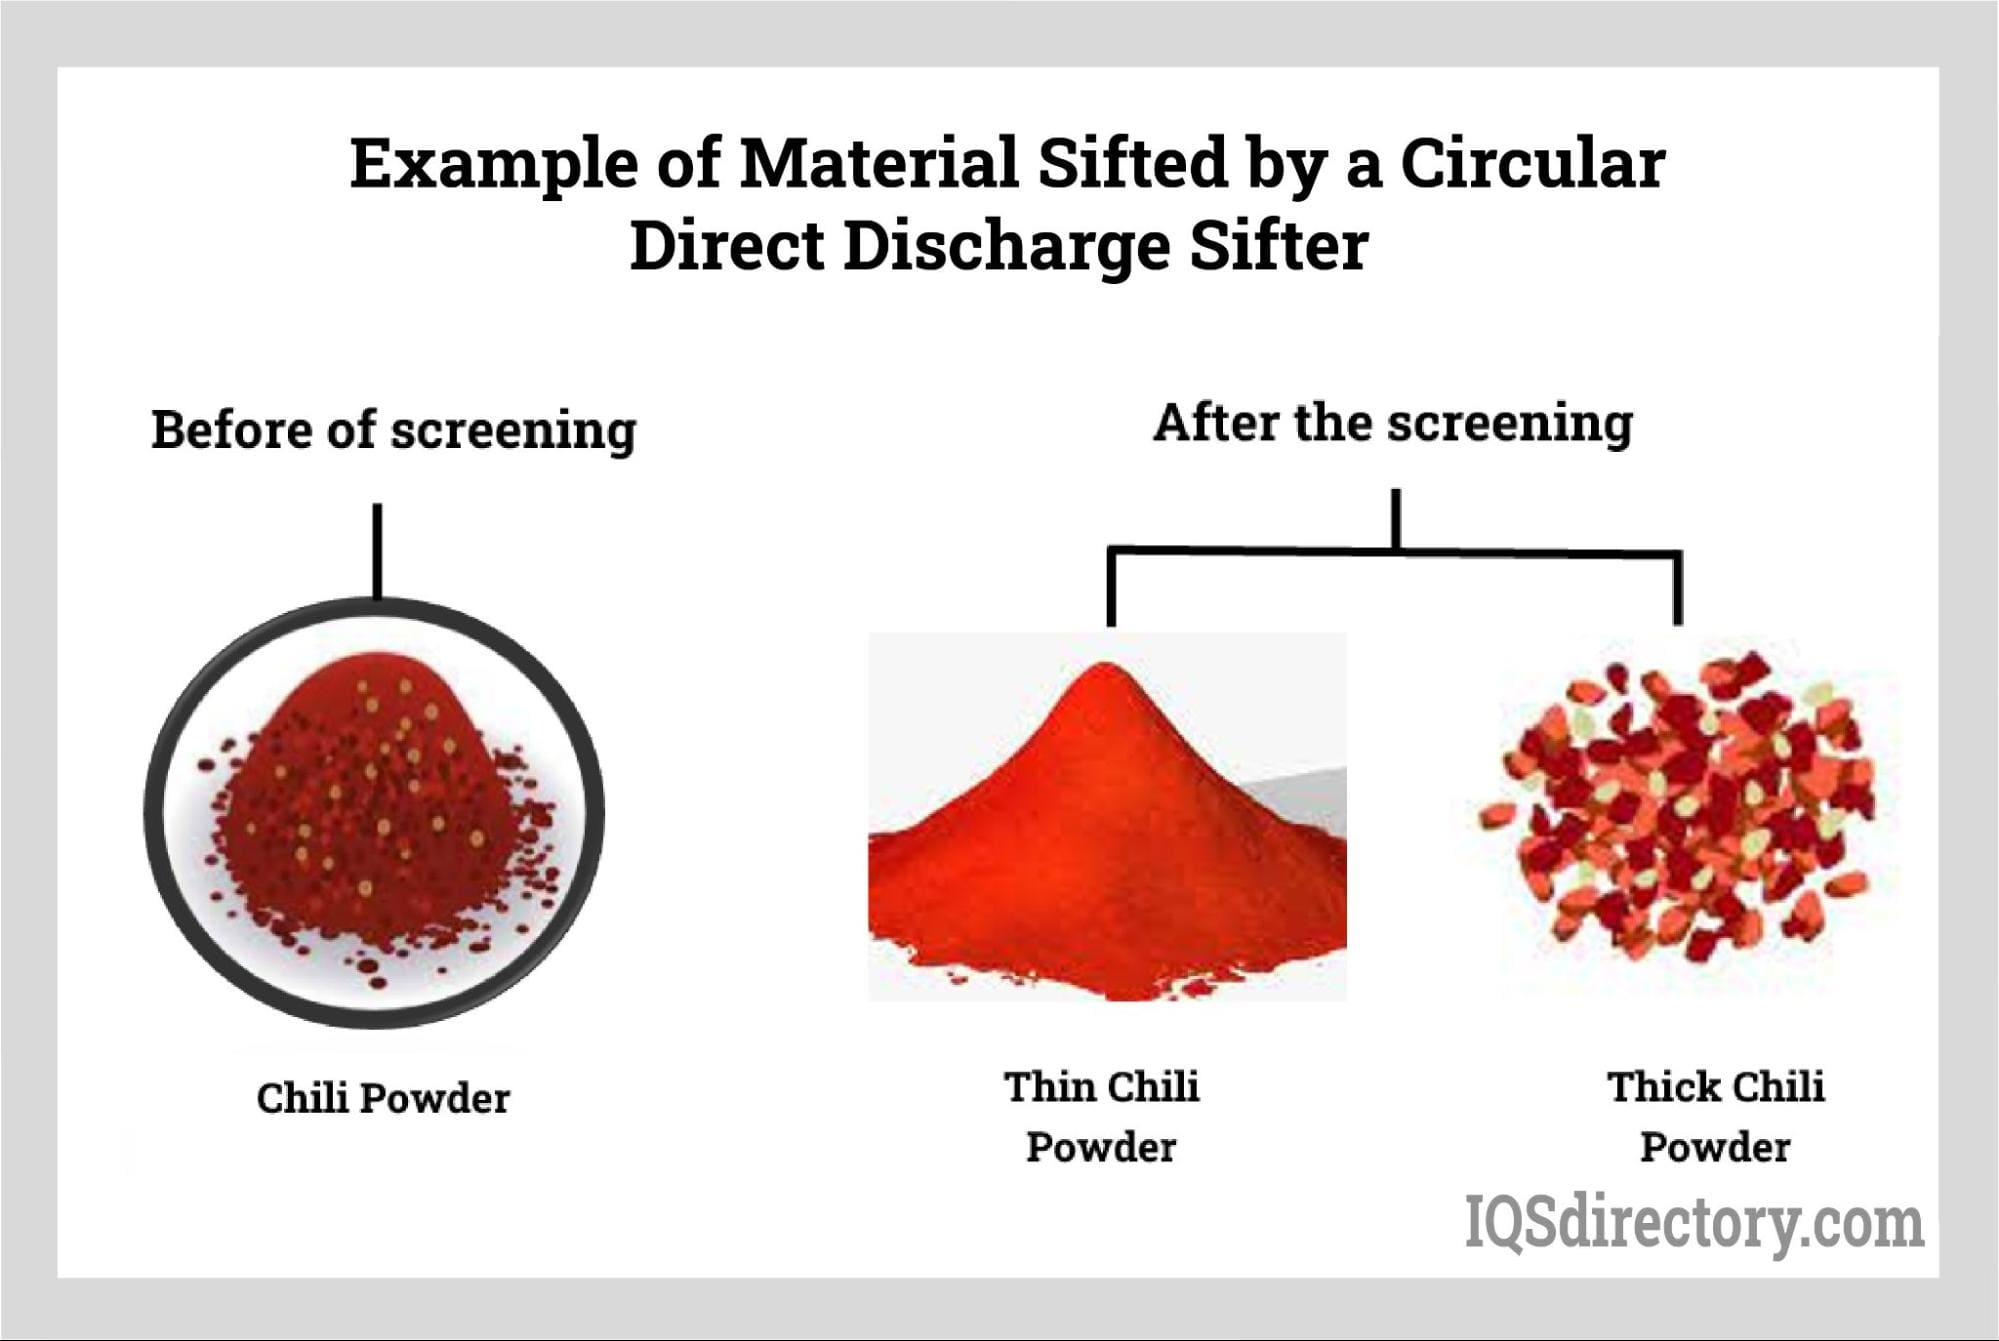 Example of Material Sifted by a Circular Direct Discharge Sifter